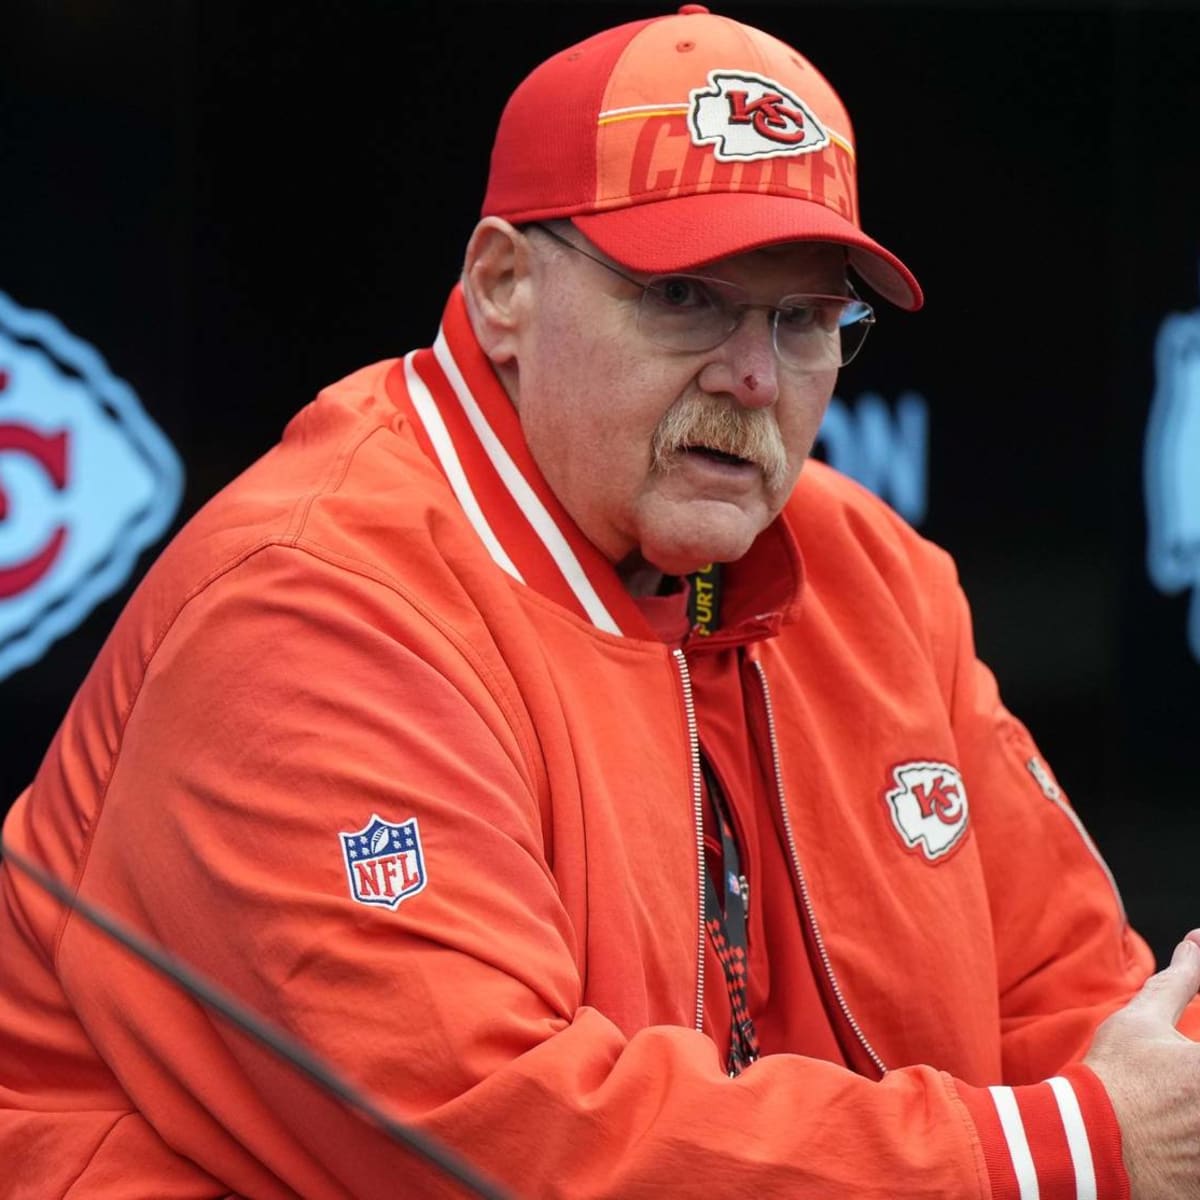 Andy Reid Criticizes Kadarius Toney’s Offside Penalty And Lack Of Communication With Referees